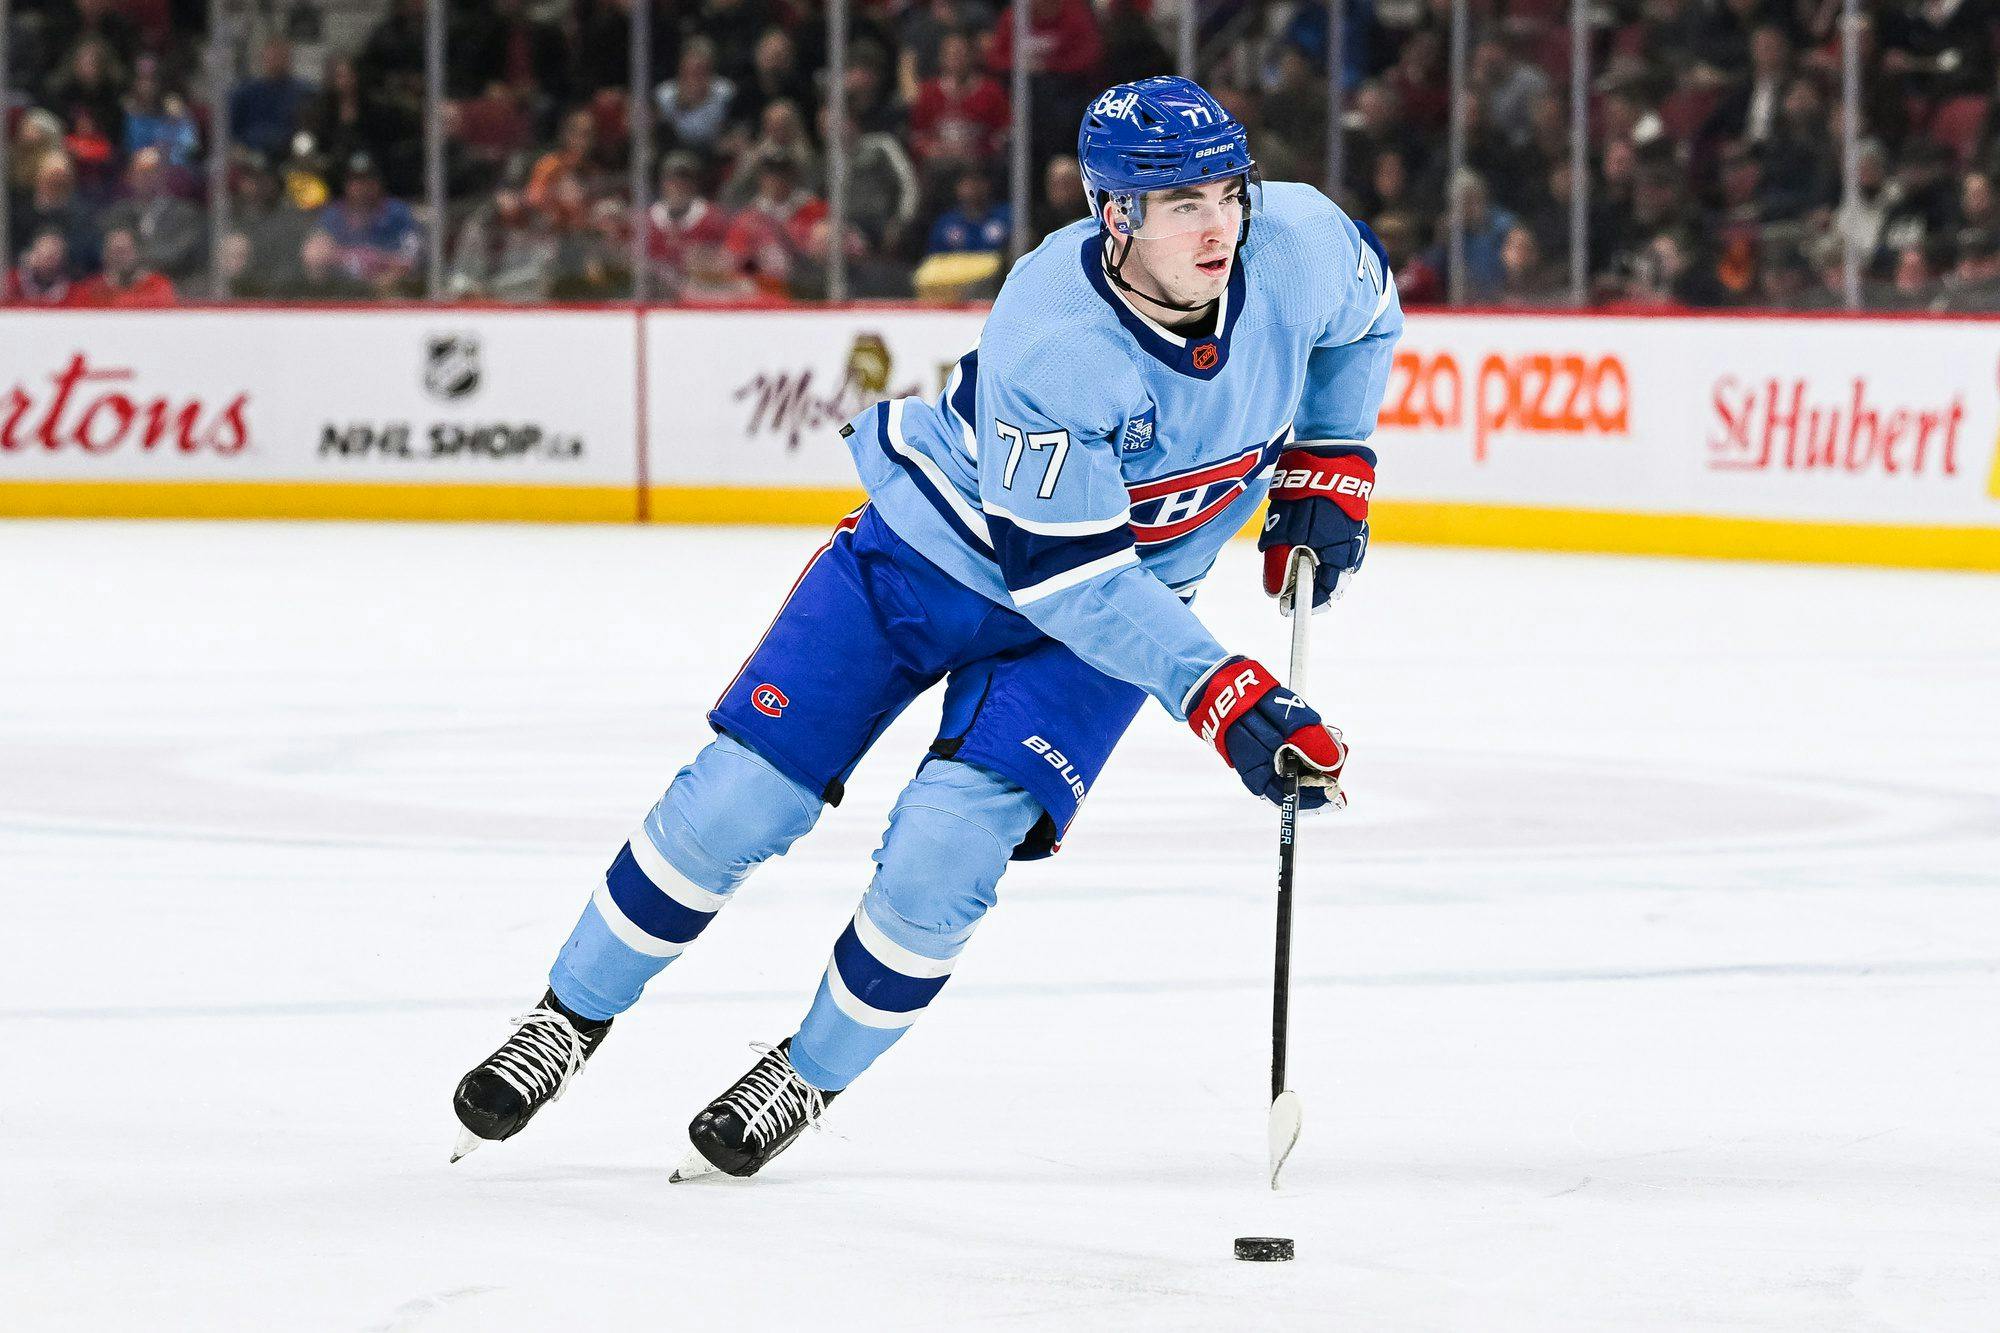 Montreal Canadiens’ Kirby Dach out minimum one week with upper-body injury